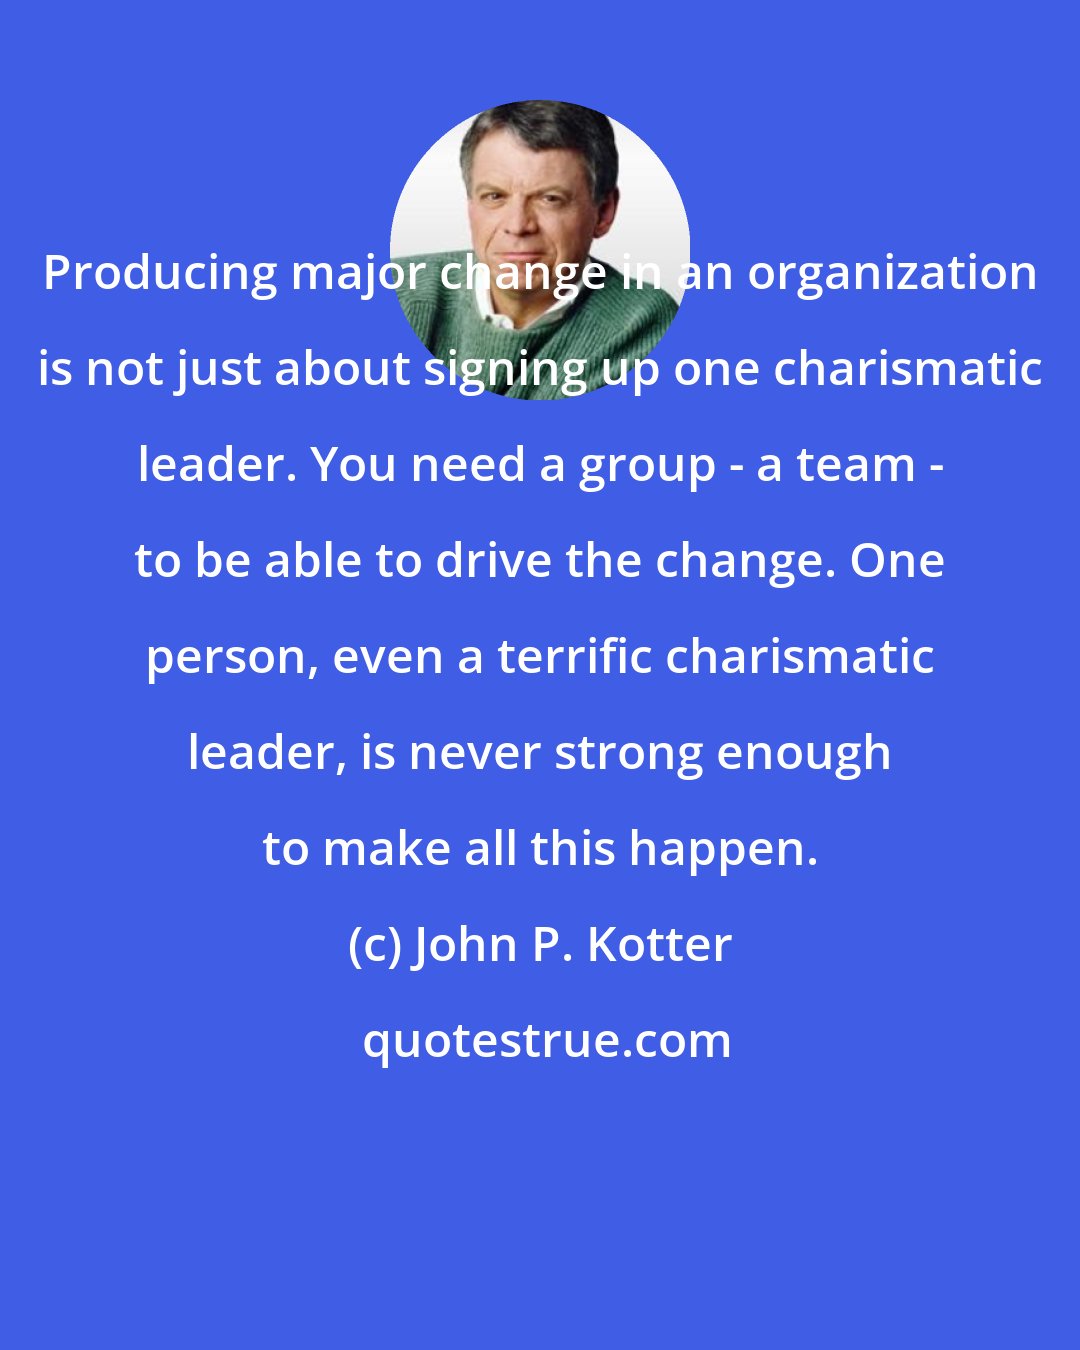 John P. Kotter: Producing major change in an organization is not just about signing up one charismatic leader. You need a group - a team - to be able to drive the change. One person, even a terrific charismatic leader, is never strong enough to make all this happen.